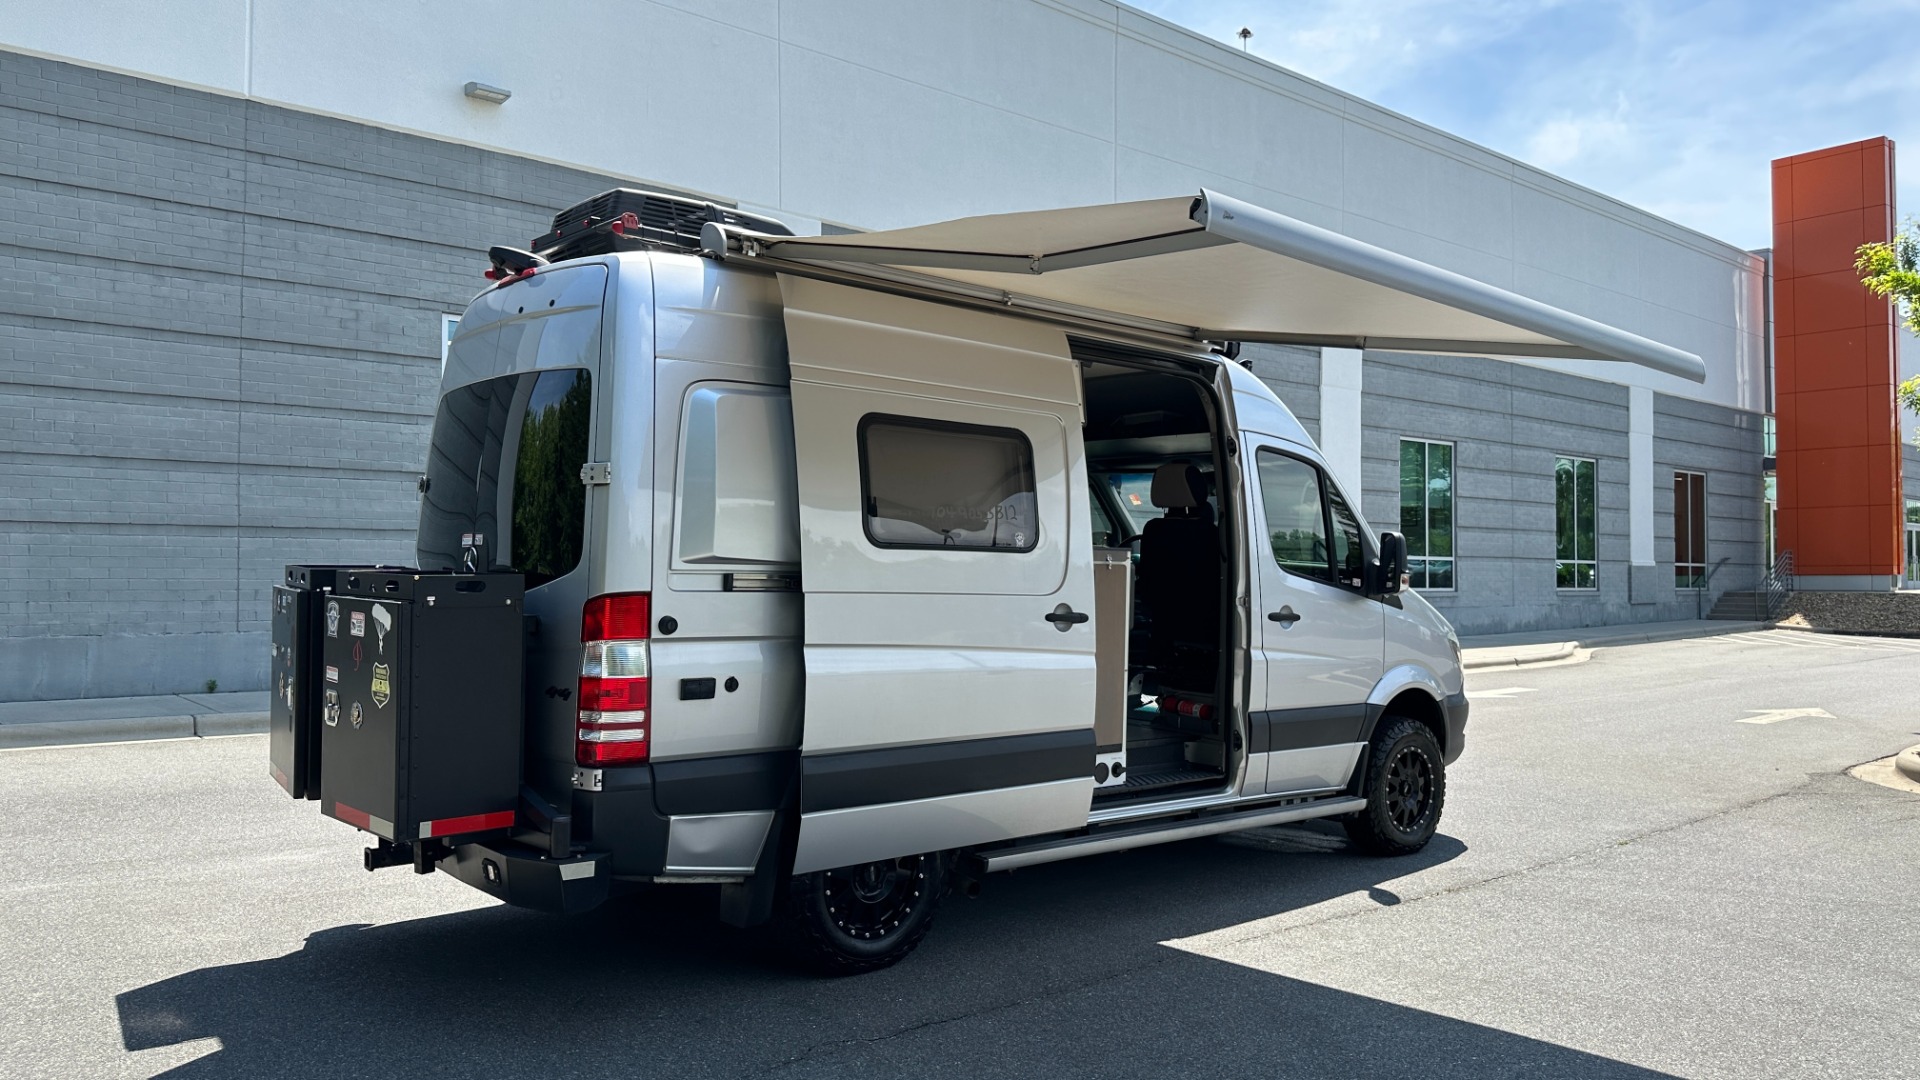 Used 2018 Mercedes-Benz Sprinter Winnebego OVERLANDER / CONVERSION SPRINTER / 4X4 / KITCHEN / BATHROOM / AIR / AWNING for sale $129,000 at Formula Imports in Charlotte NC 28227 86